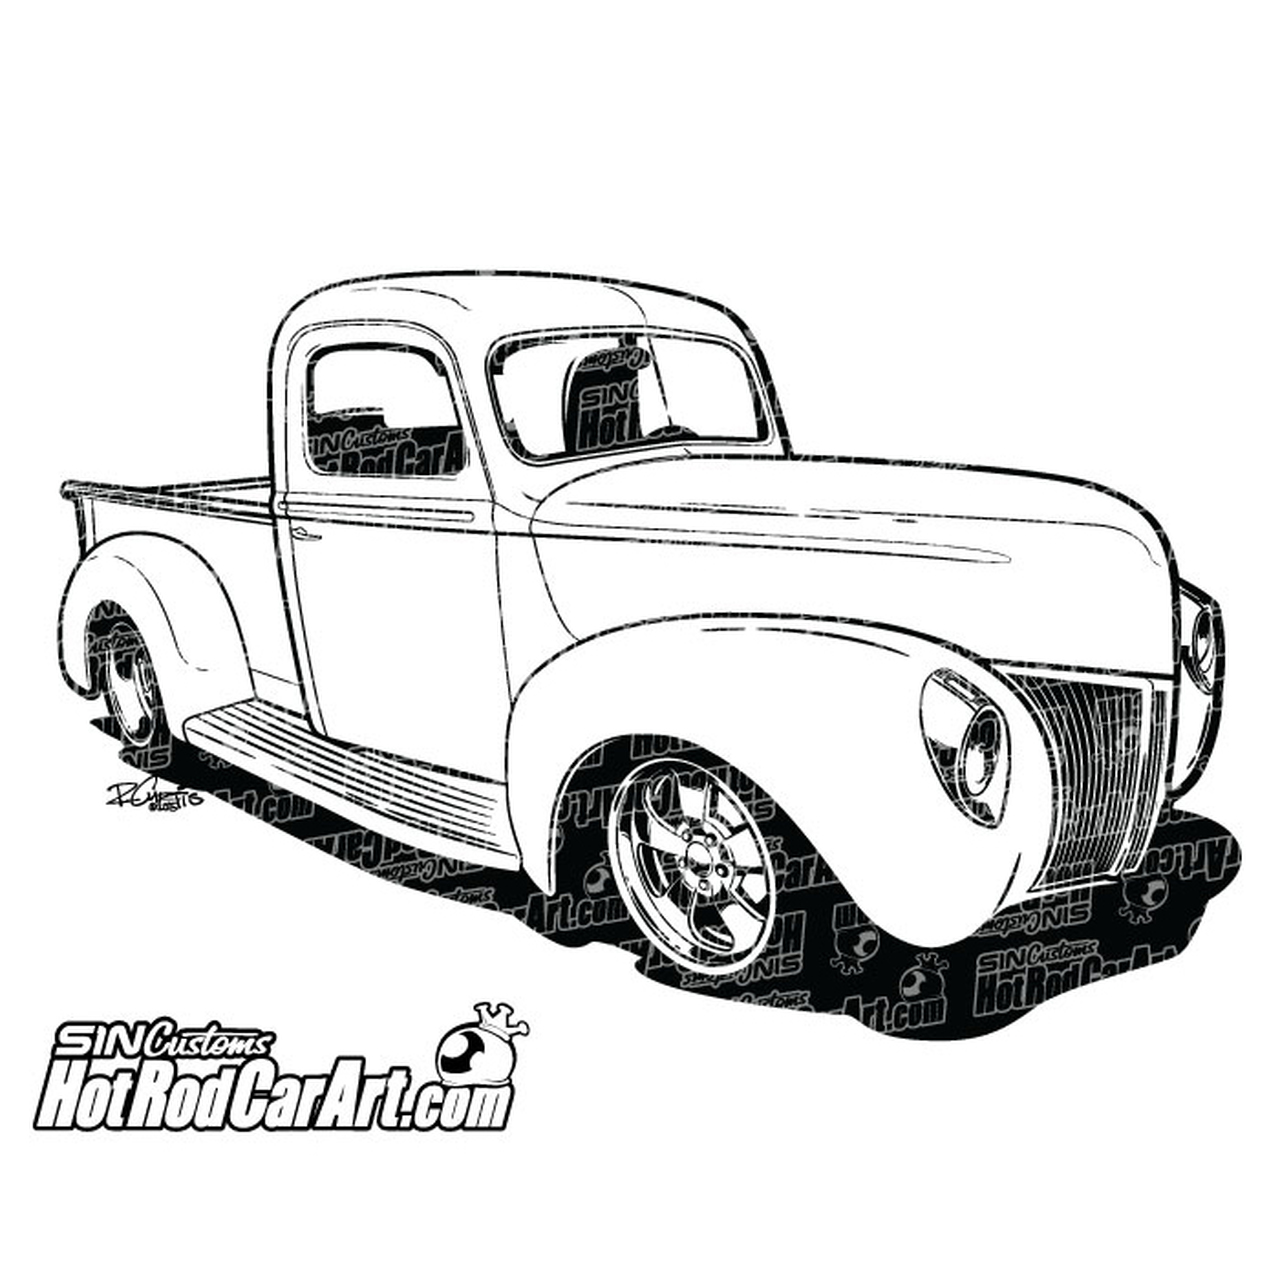 1940 Ford Pickup Truck.